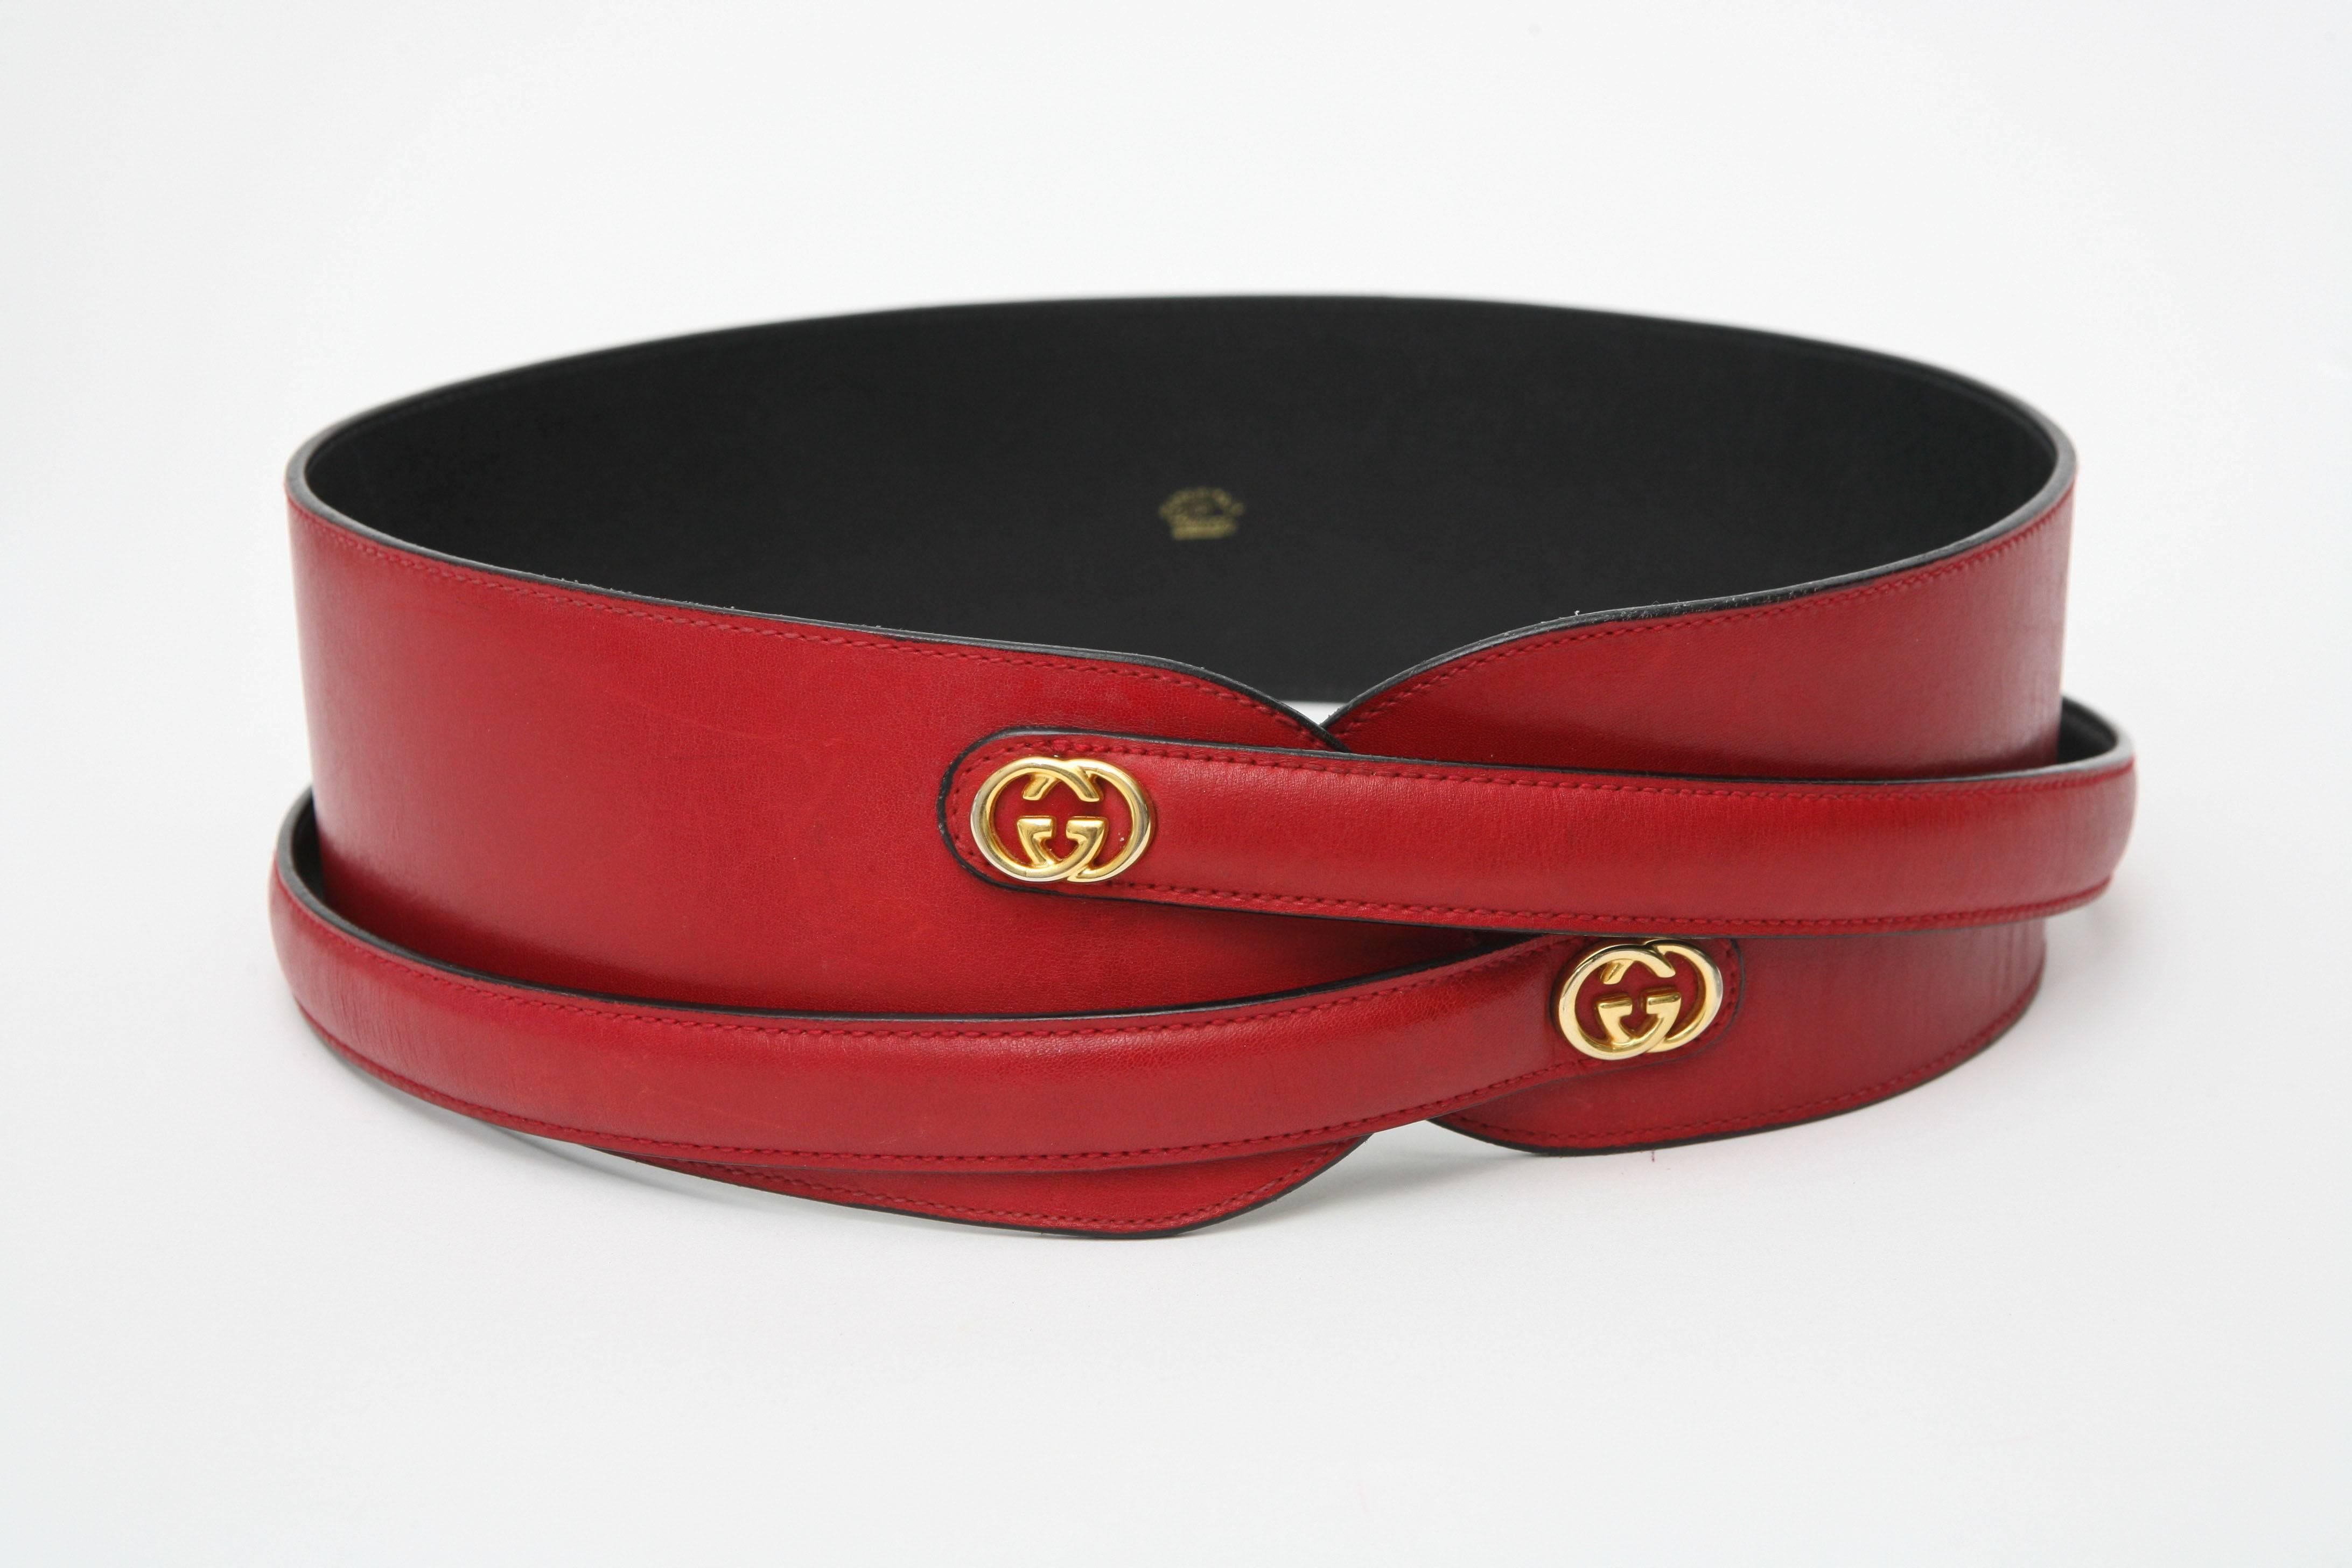 This lovely red leather Gucci belt has an overlapping cross cross strap that belts in the back. 
The color is a lovely red. Hallmarked on the inside Gucci Made In Italy.
It is for a very small waist.

NOTE: THIS WILL BE ON THE FIRST LAUNCH OF